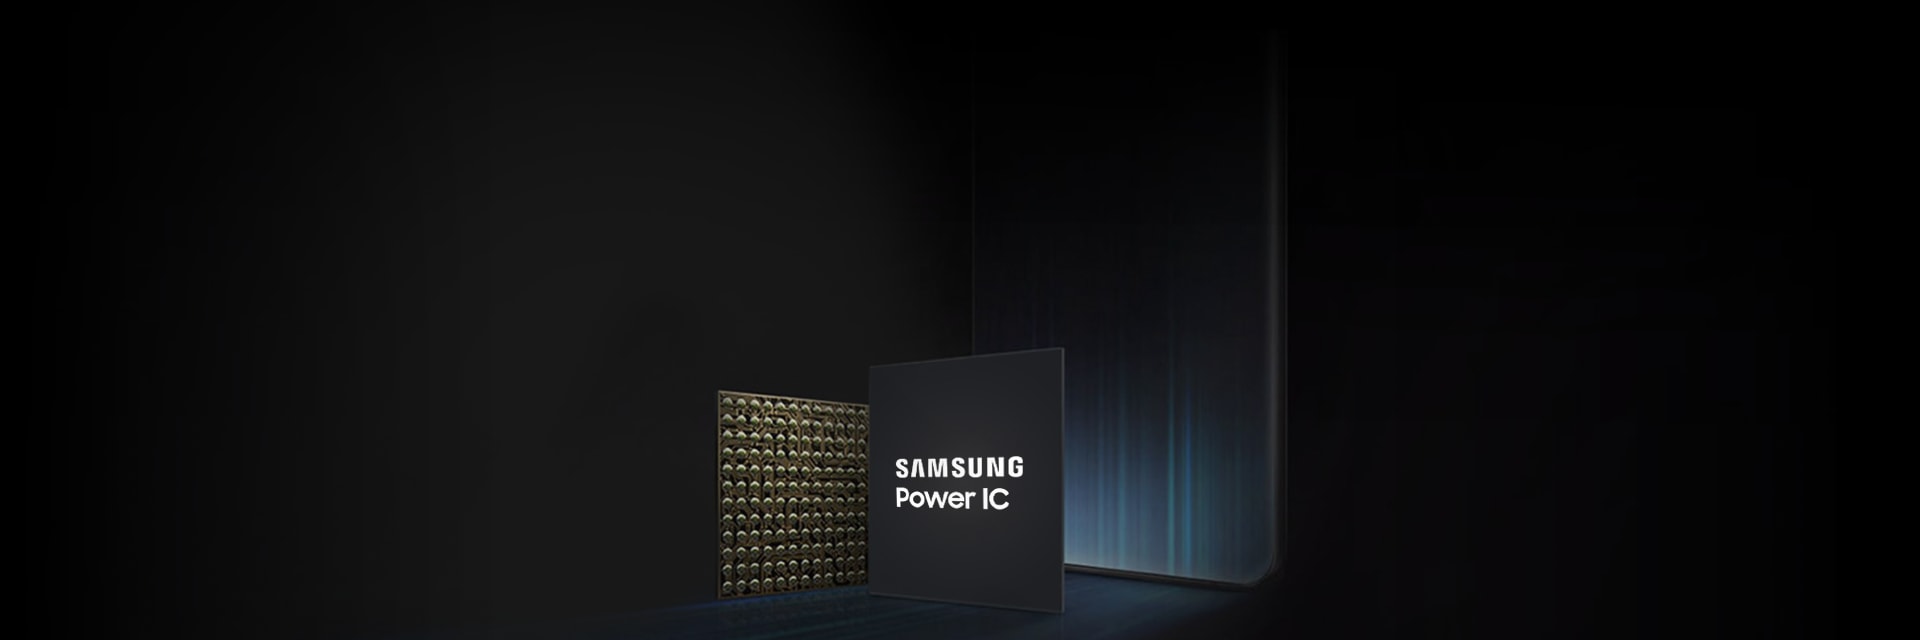 An illustrative image of Samsung Power IC against an image of a smartphone.